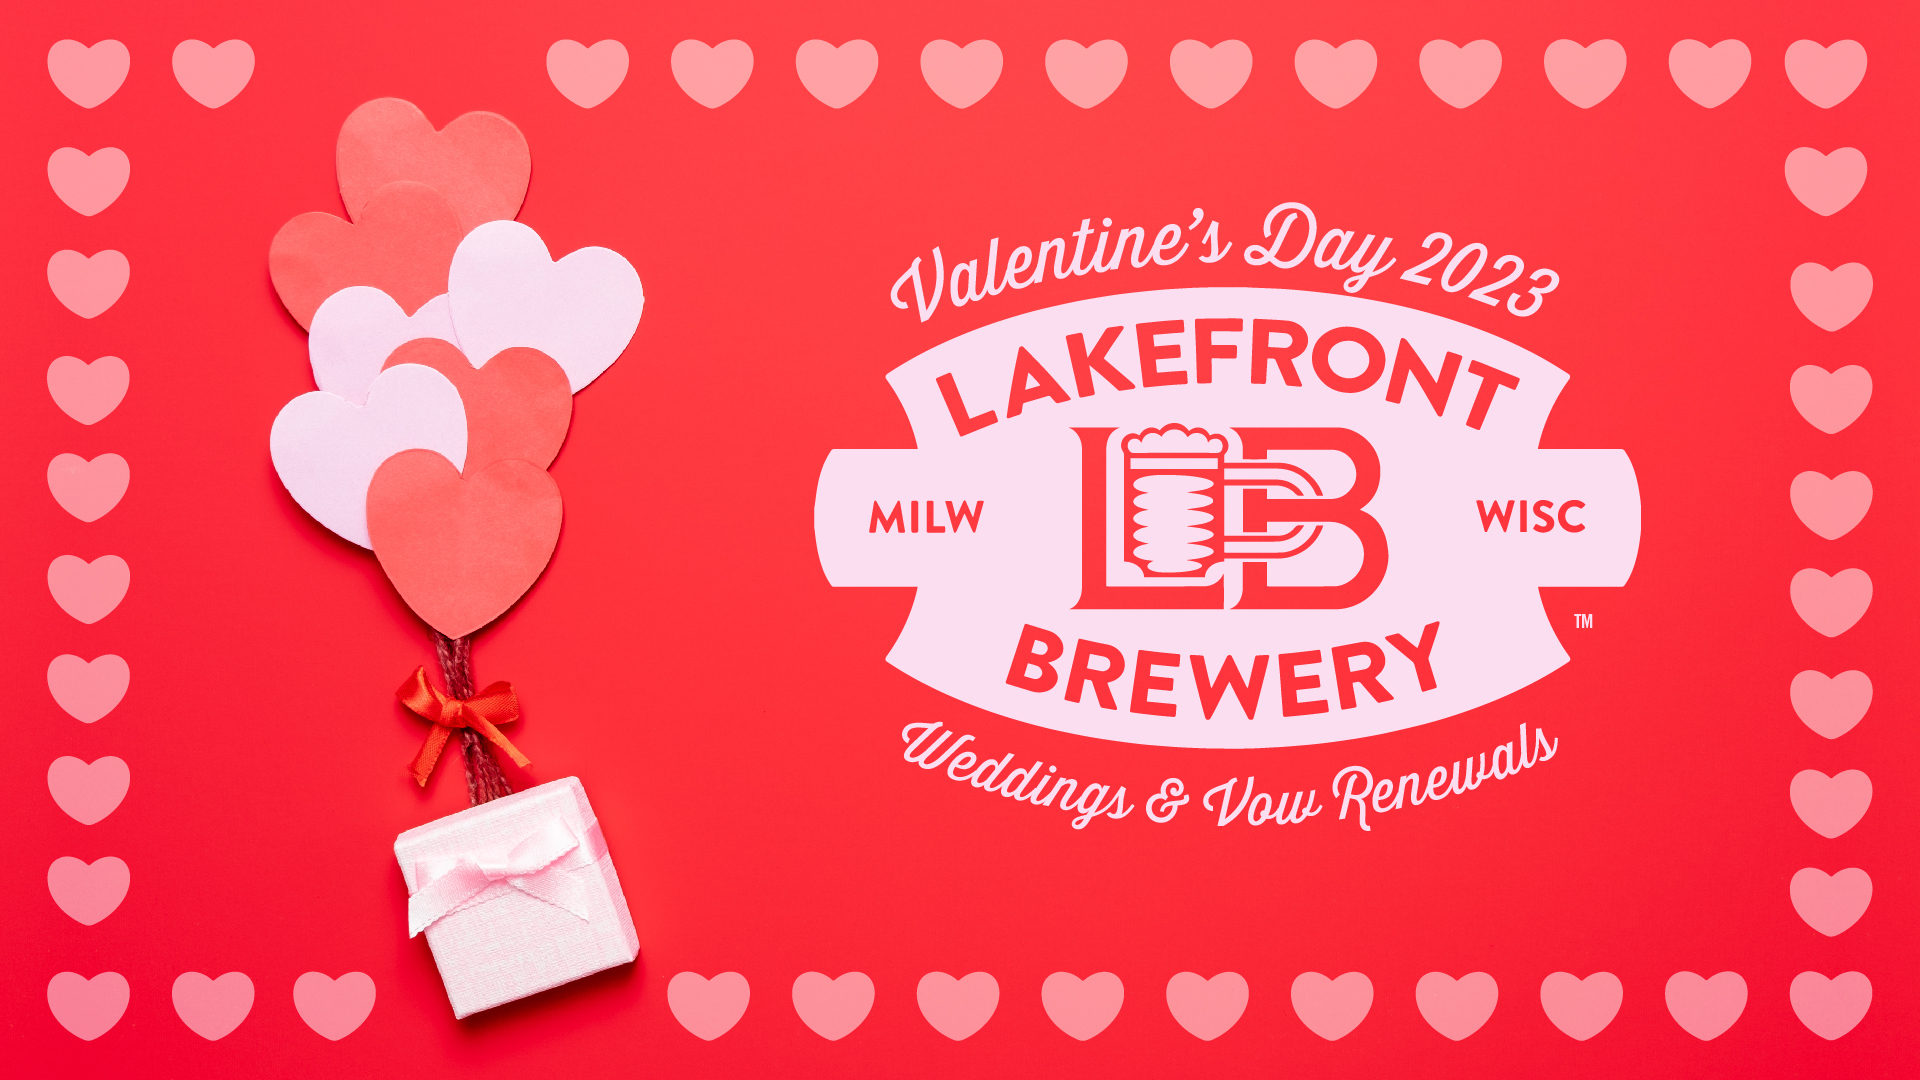 Valentine’s Day Means Another Celebration of Love at Lakefront Brewery